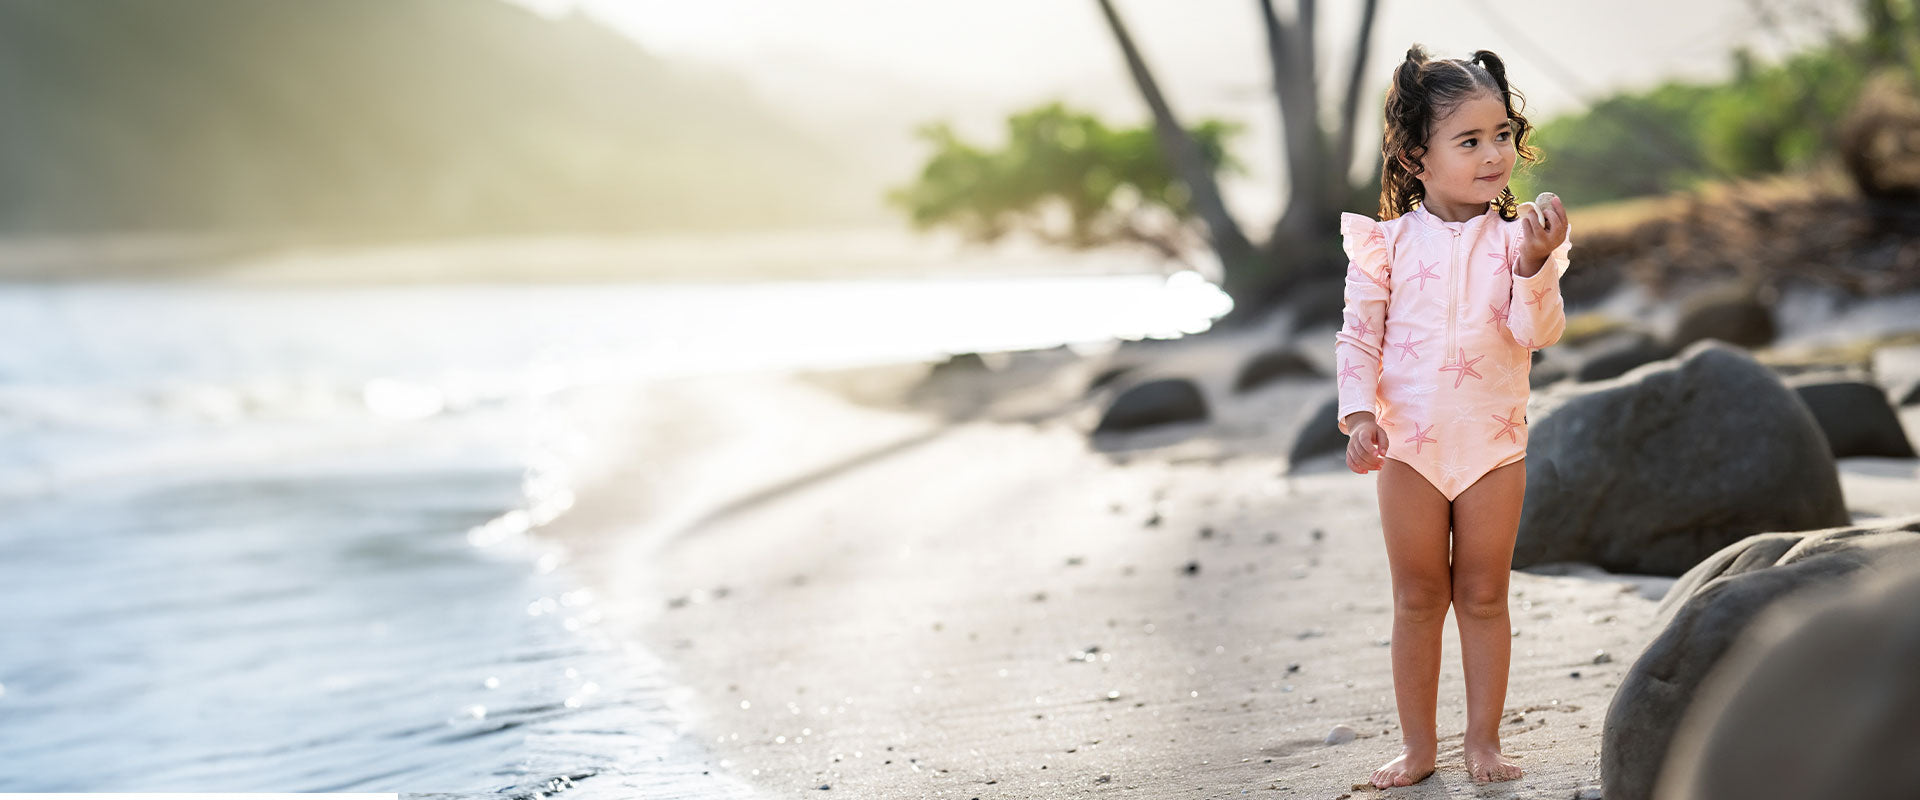 A young girl in a pink starfish print swimsuit stands thoughtfully on a sandy beach, with waves gently breaking in the background at sunset.